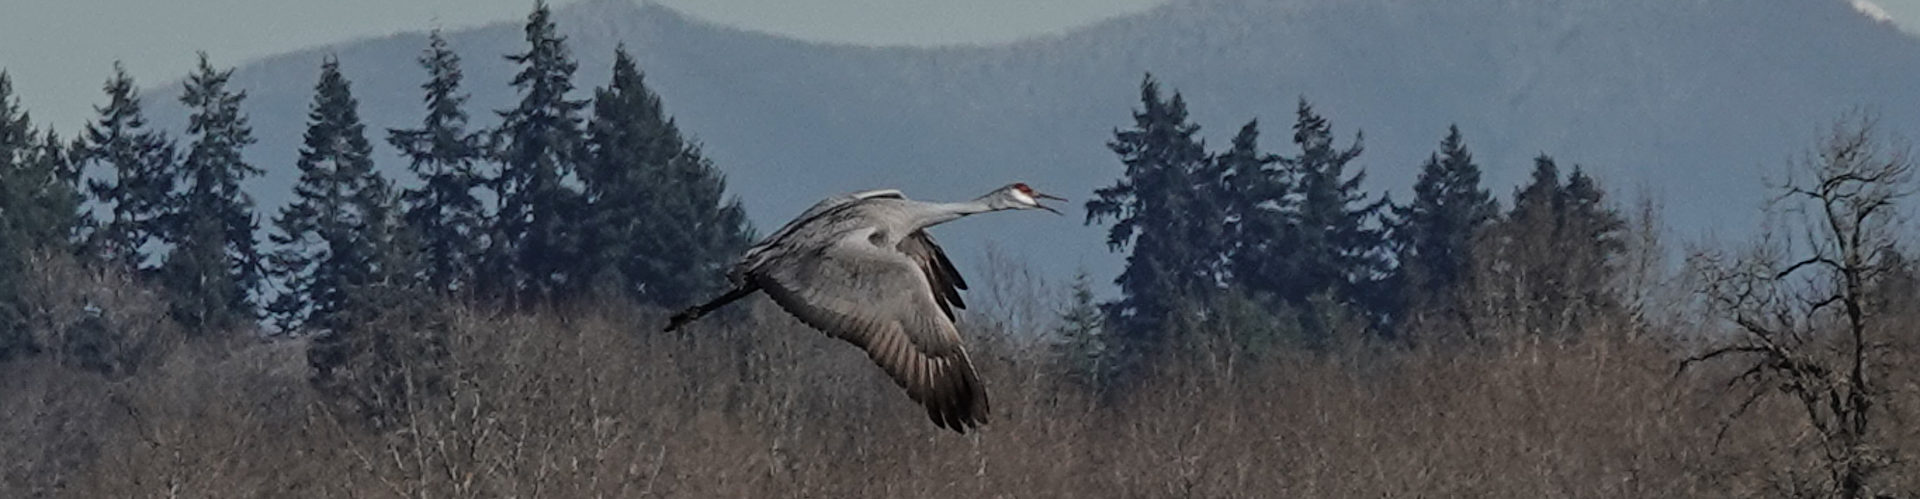 From the Archive: Sandhill Cranes and Ridgefield Wildlife Refuge, January 2022